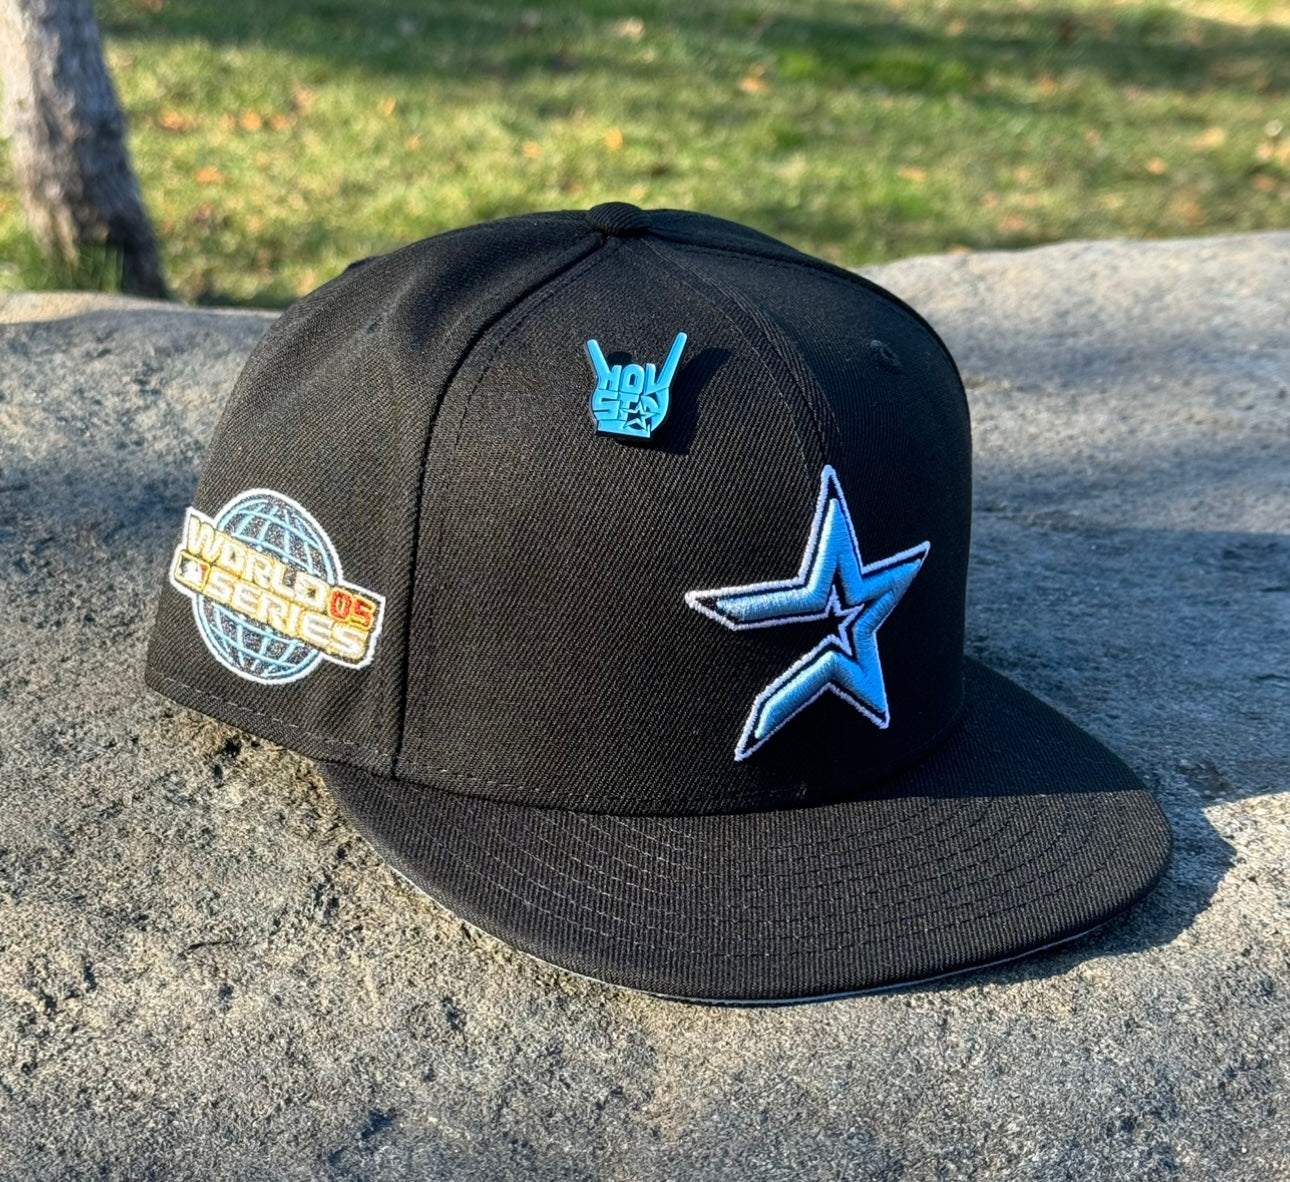 Houston Astros Open Star with 2005 World Series Side Patch Fitted Hat New Era 5950 (Black/Sky Blue)